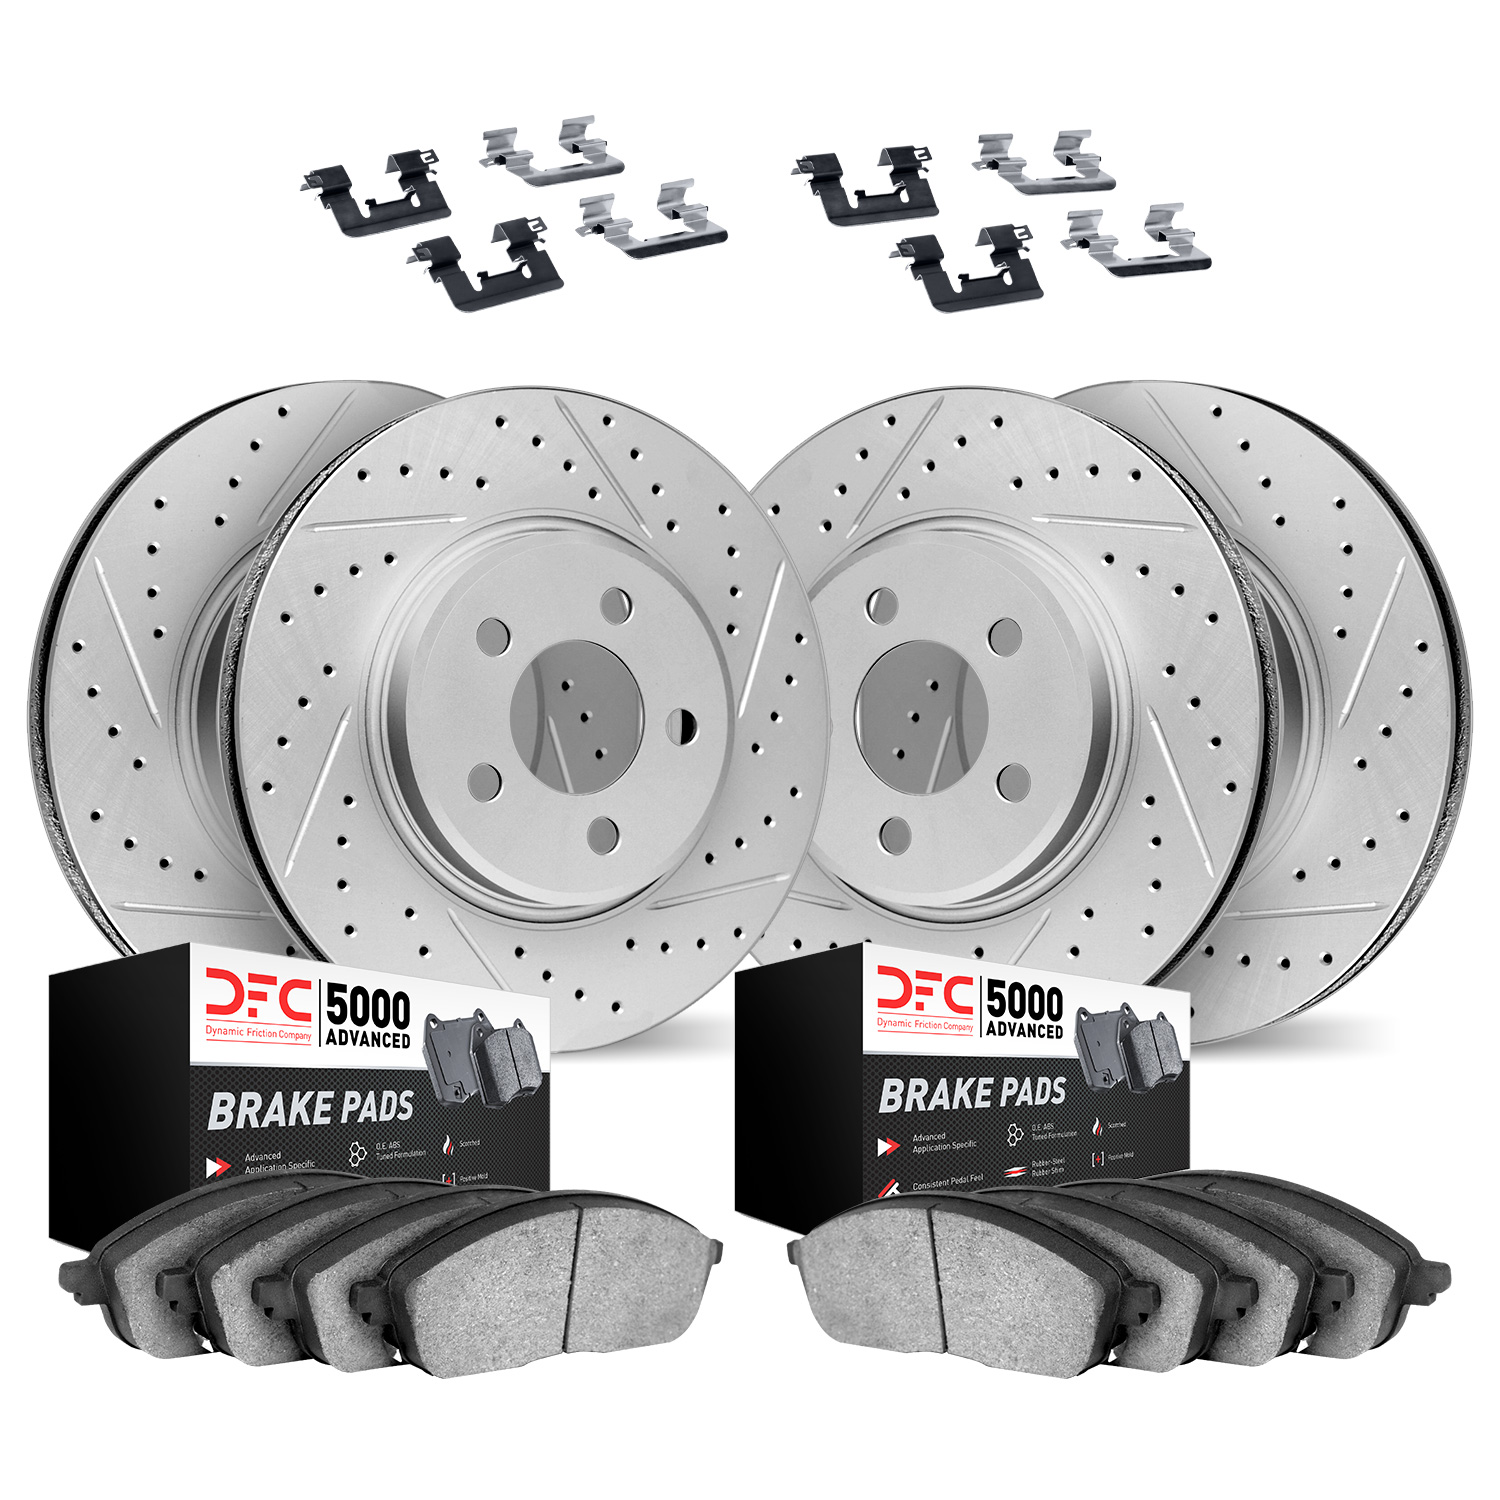 2514-02029 Geoperformance Drilled/Slotted Rotors w/5000 Advanced Brake Pads Kit & Hardware, 2014-2019 Porsche, Position: Front a